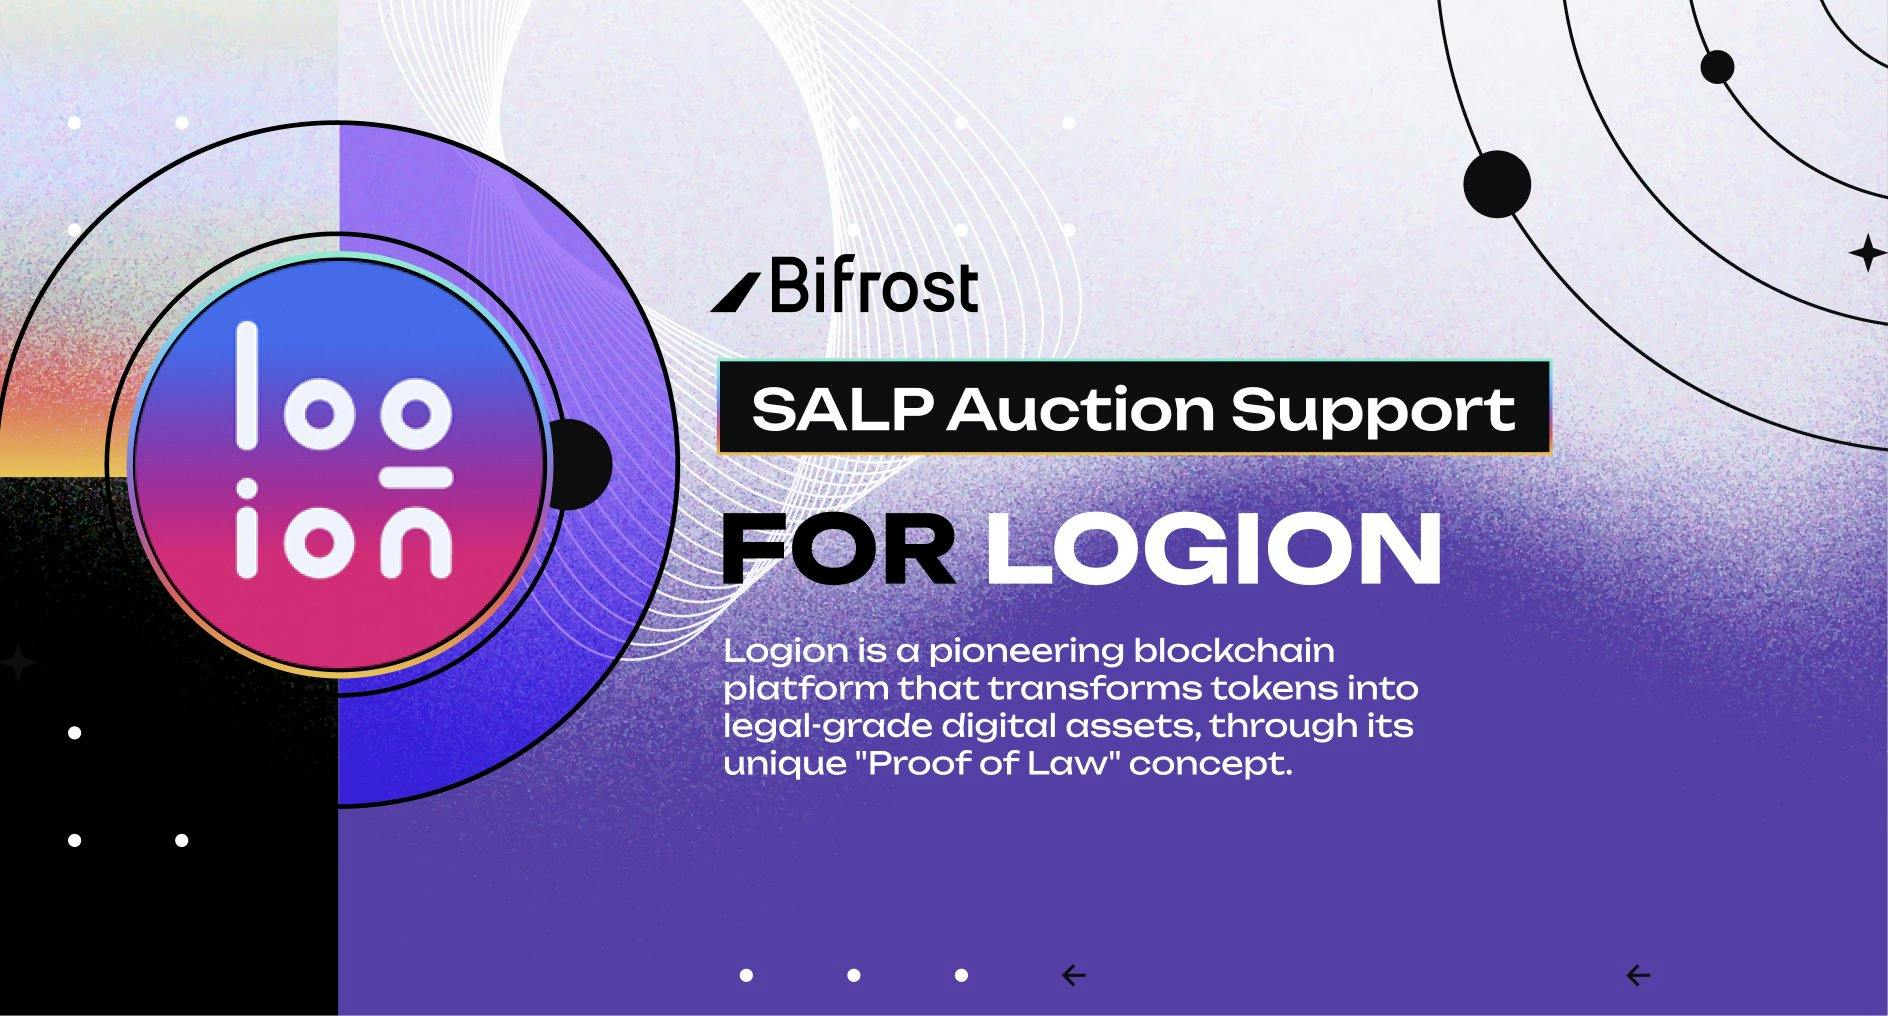 Bifrost supports the Logion Polkadot Crowdloan